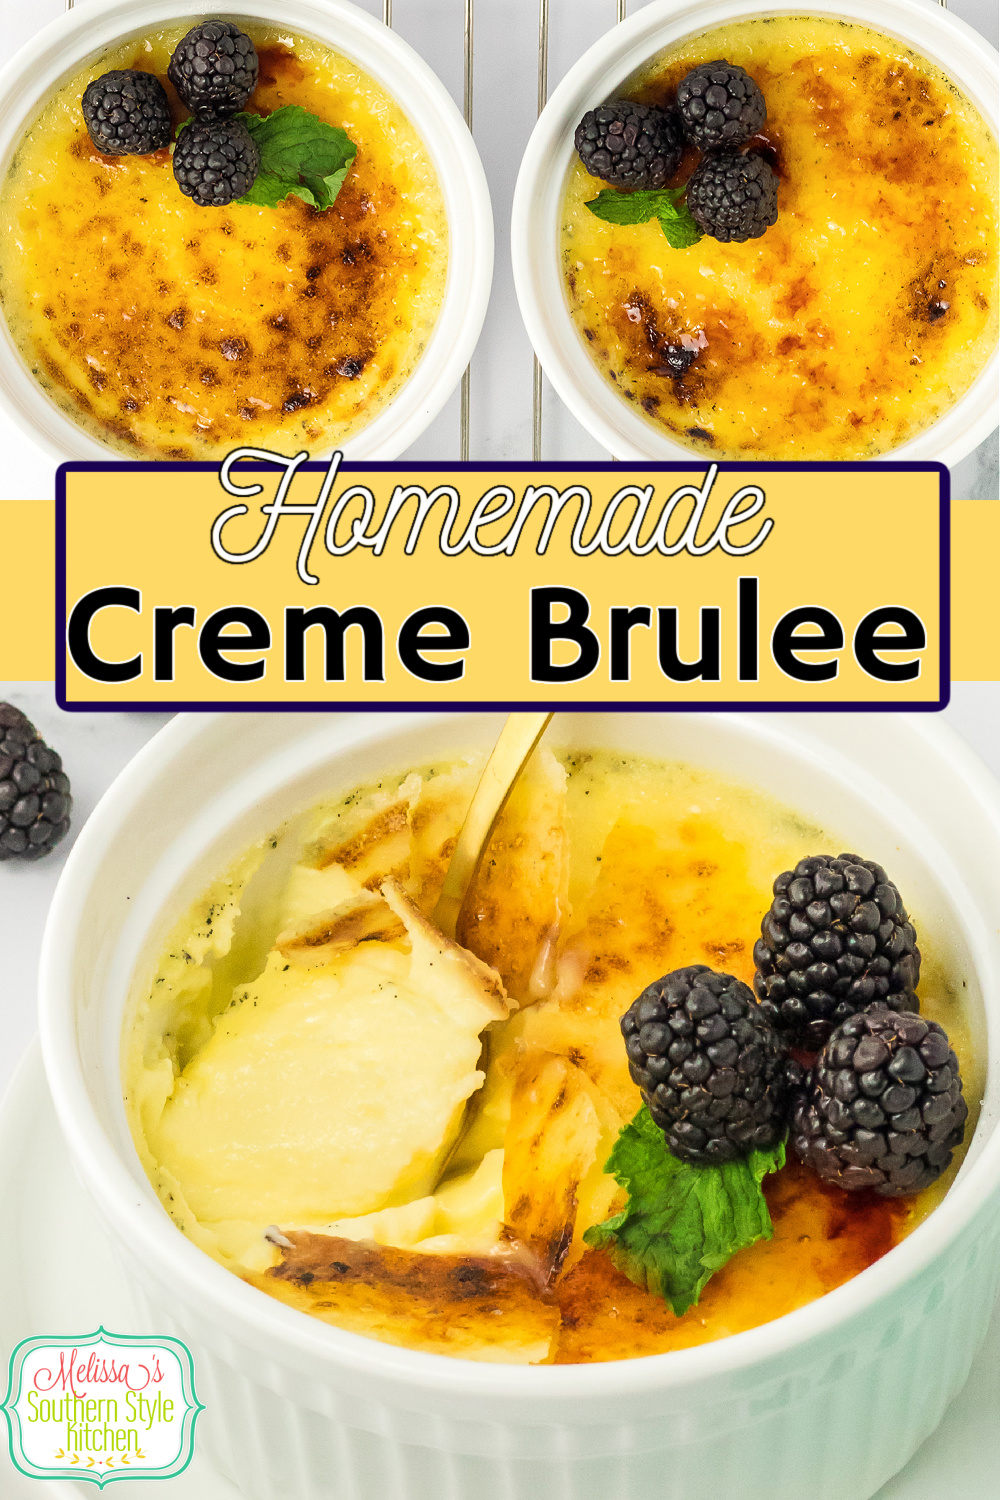 This Creme Brulee recipe features a creamy vanilla bean custard crowned with a caramelized sugar topping that makes it simply irresistible. #cremebrulee #bakedcustard #bakedcremebrulee via @melissasssk